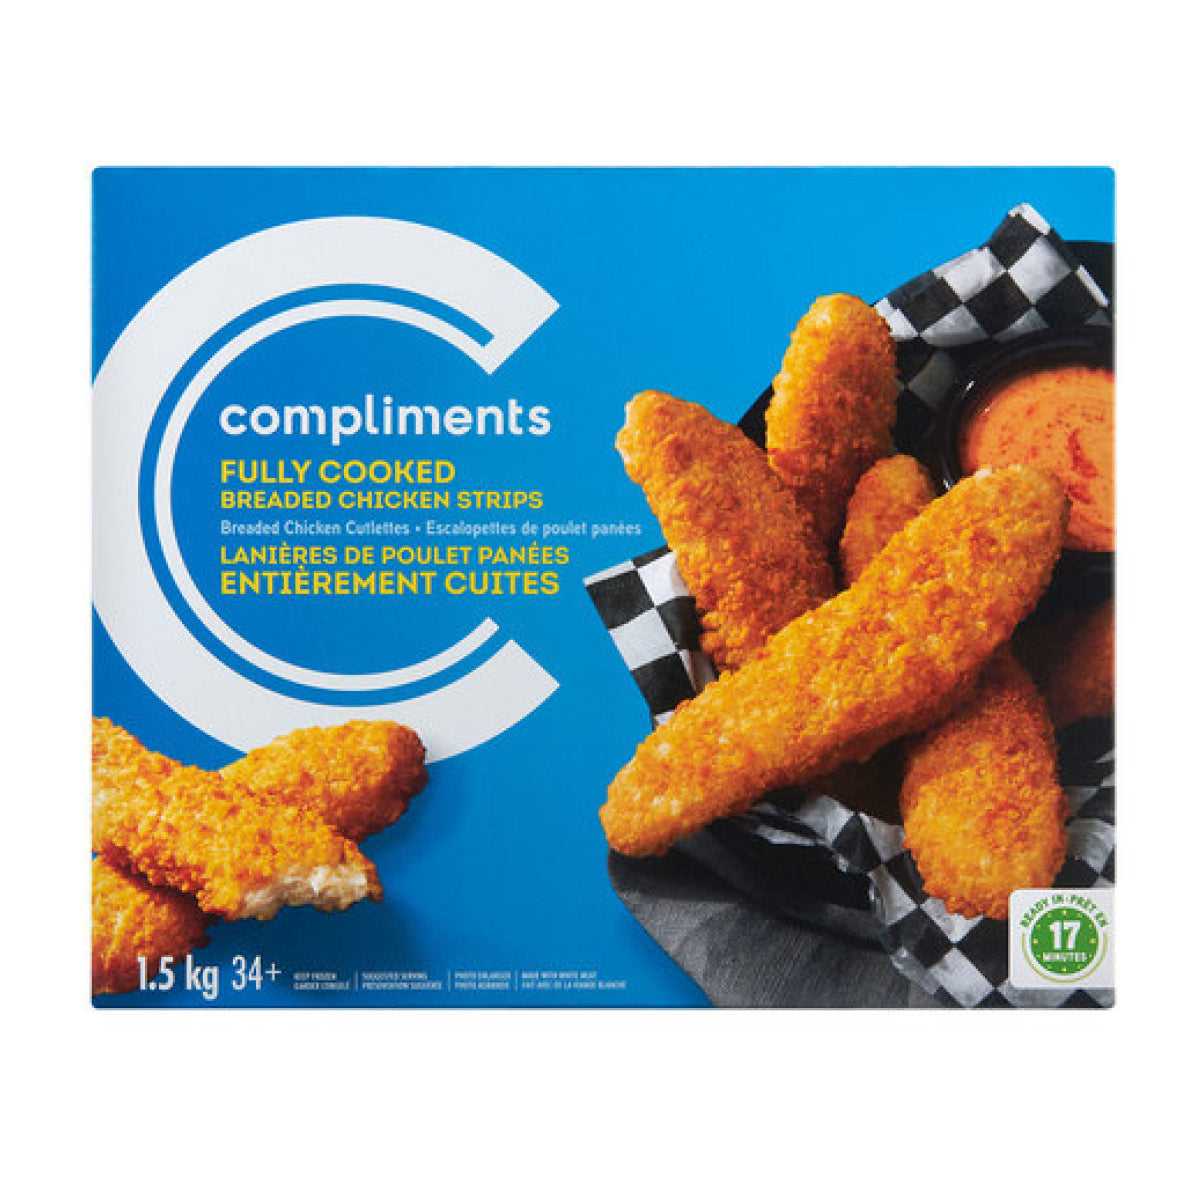 Compliments Chicken Strips, Fully Cooked 1.5kg